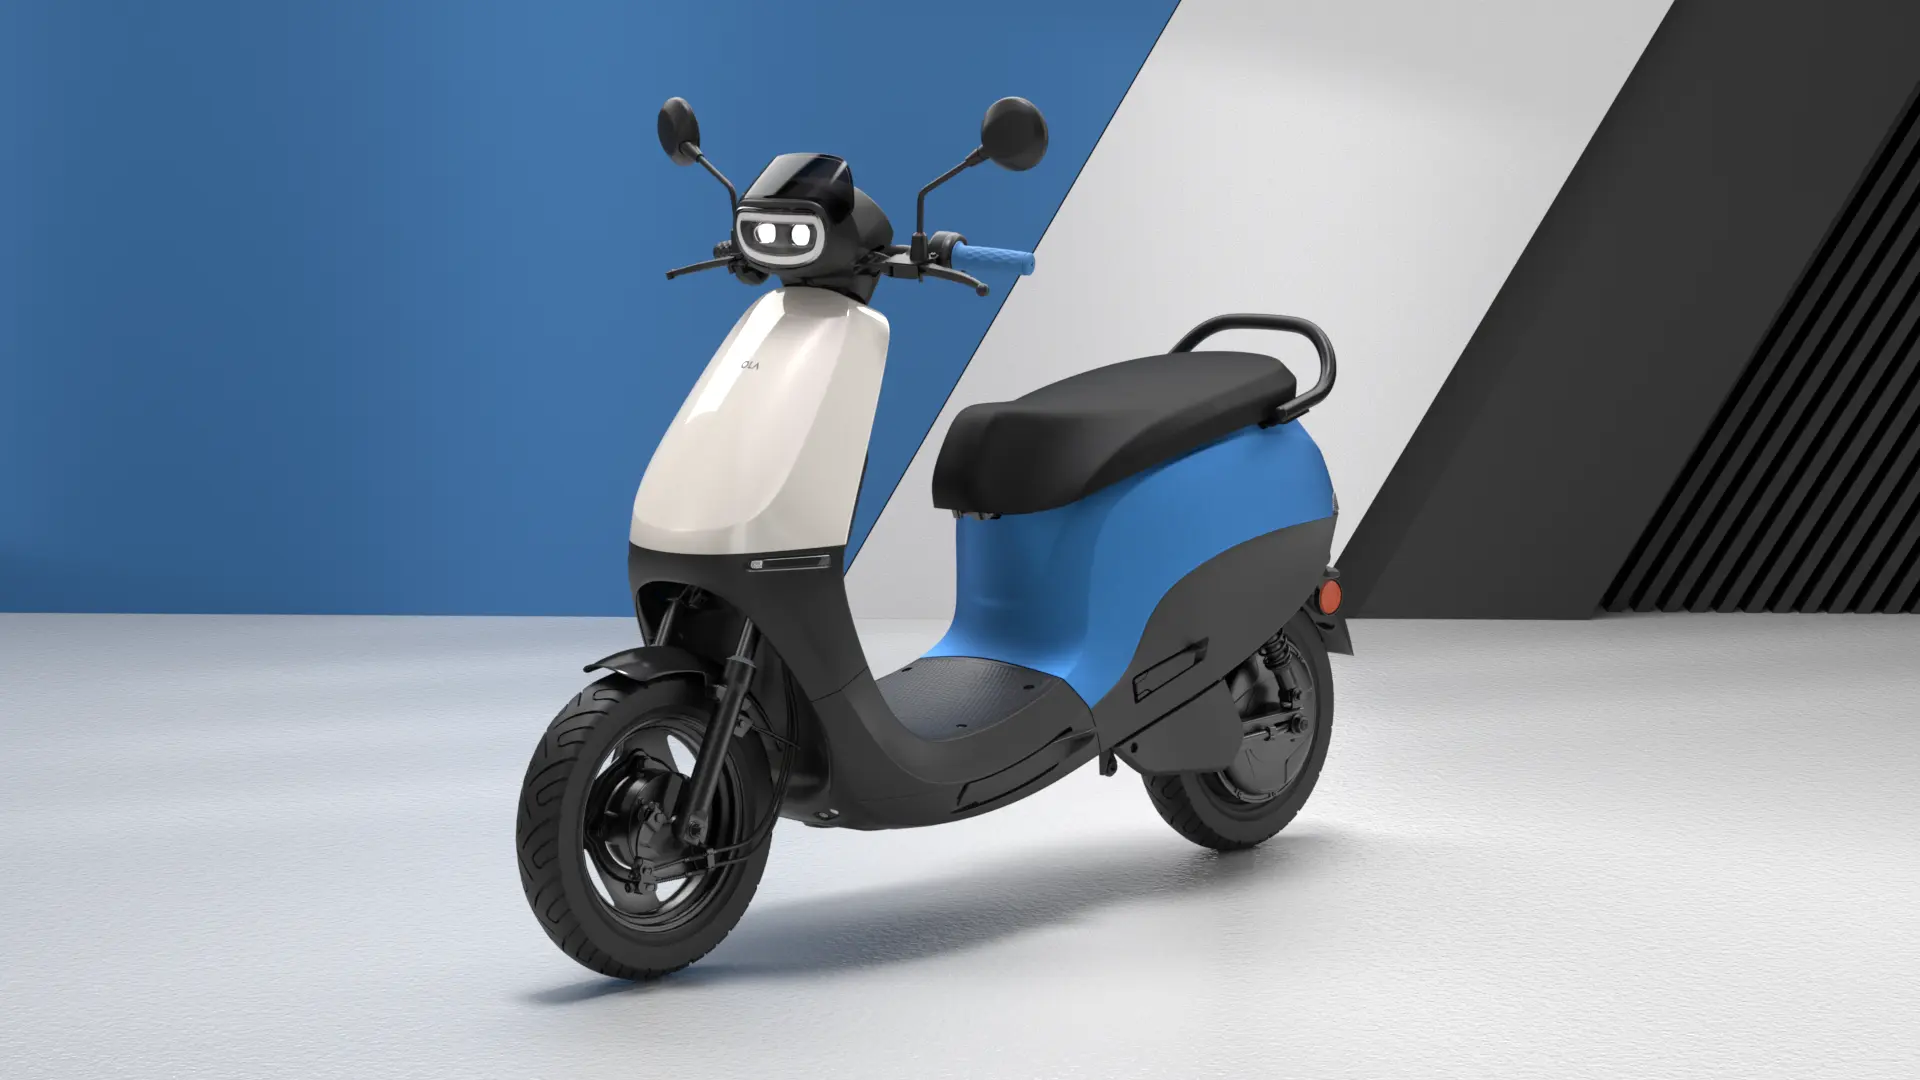 OLA Electric S1 X with Blue color